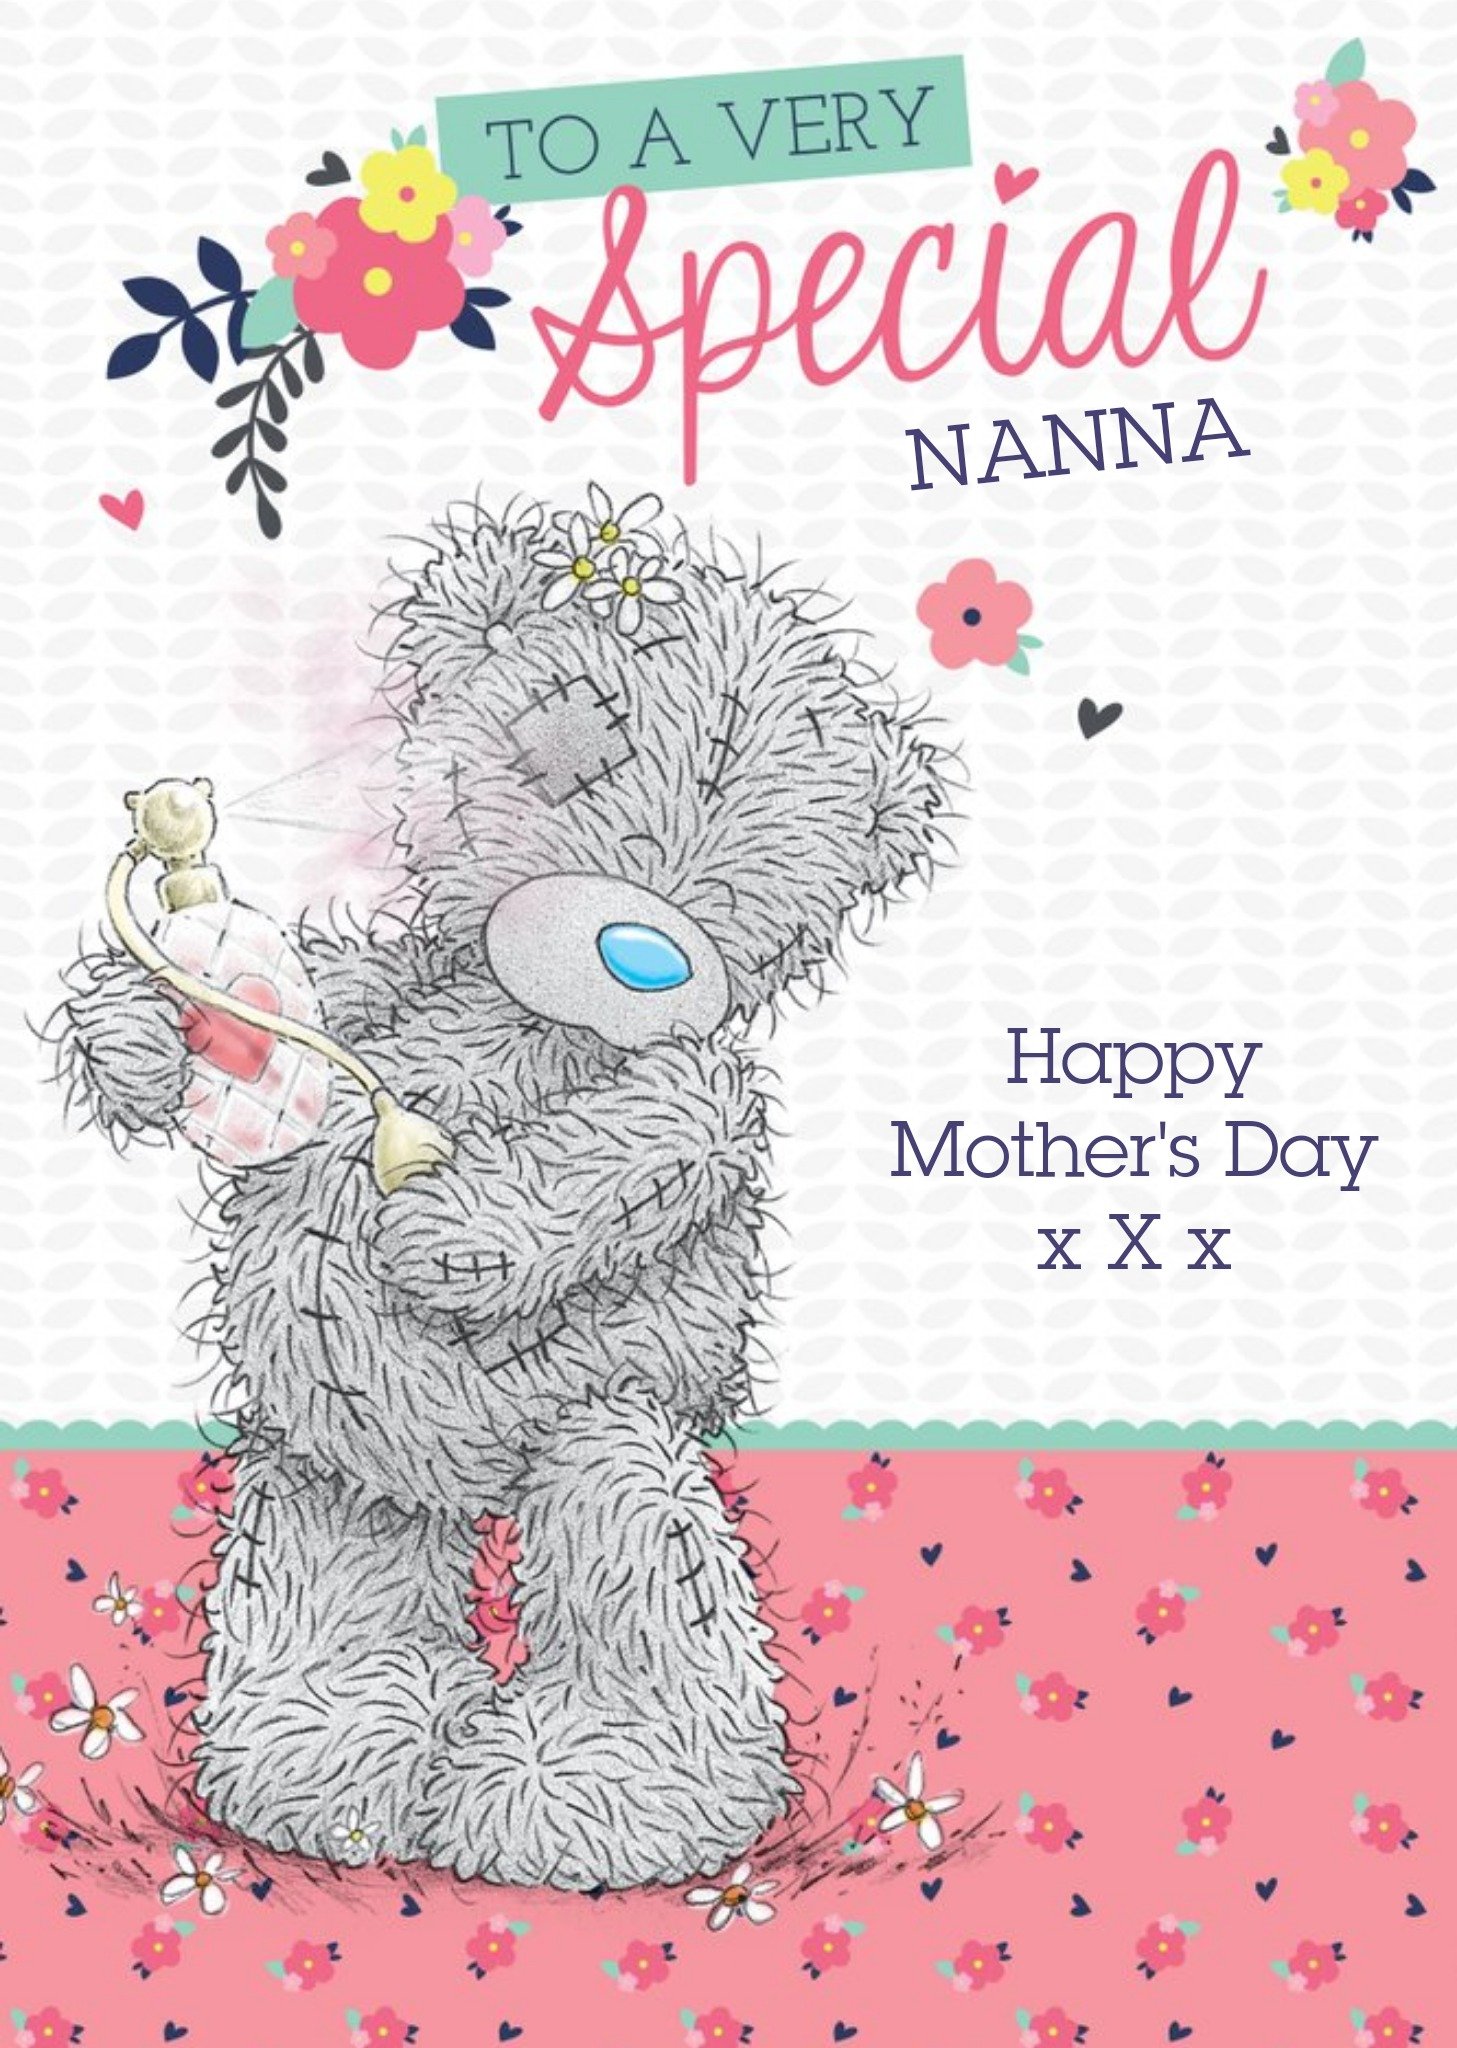 Me To You Mother's Day Card - Tatty Teddy Cute Card - Special Nanna, Large